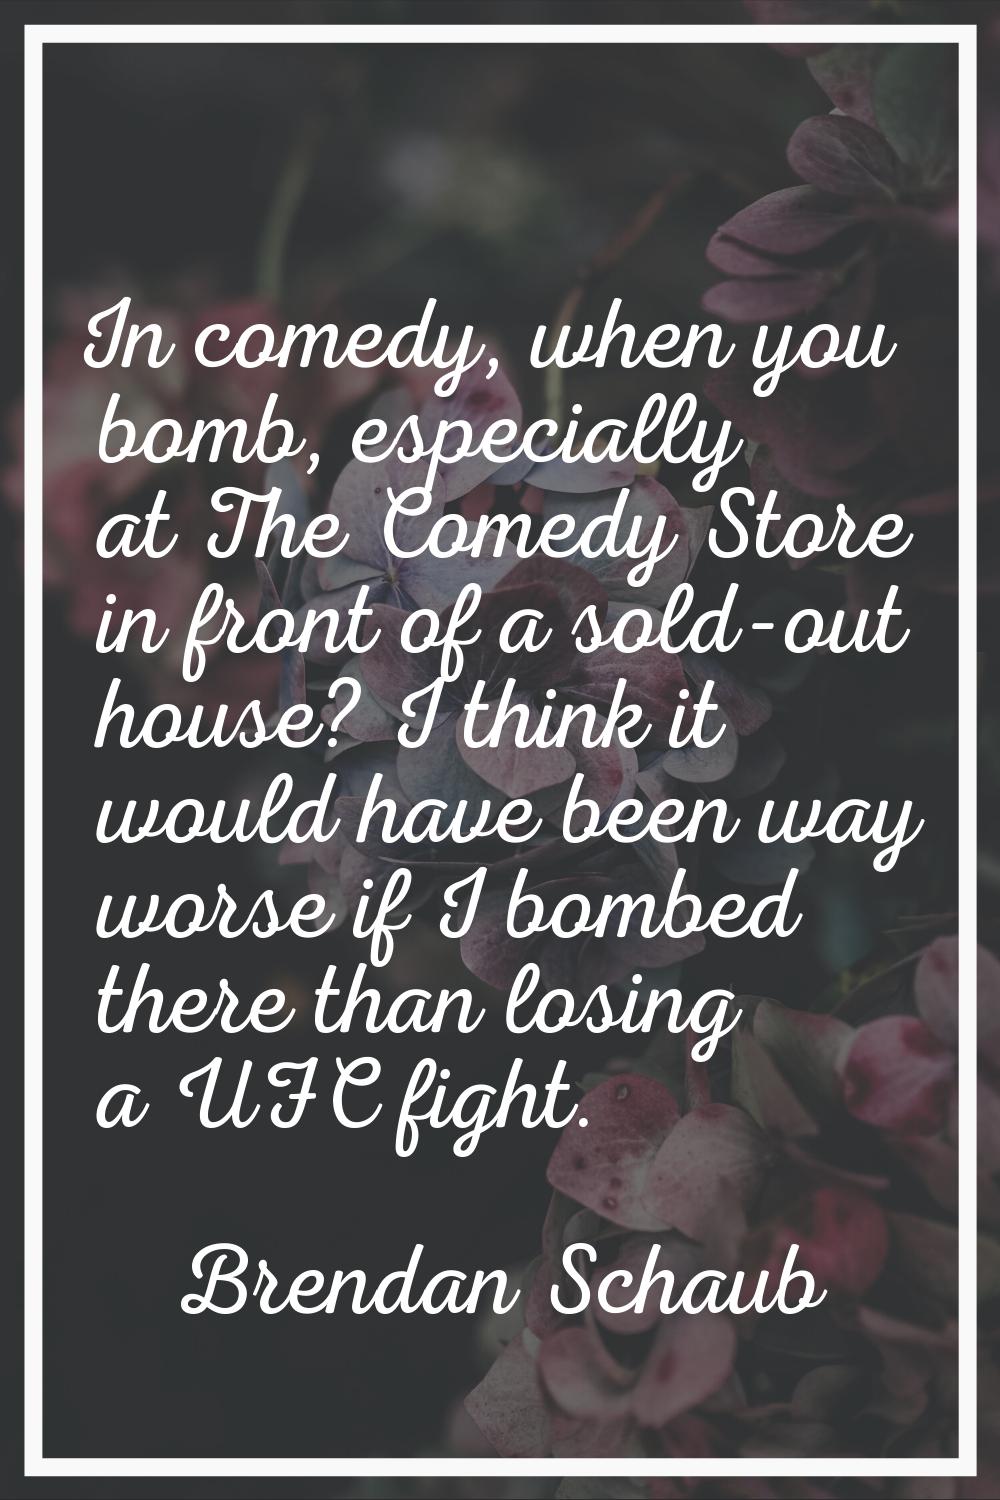 In comedy, when you bomb, especially at The Comedy Store in front of a sold-out house? I think it w